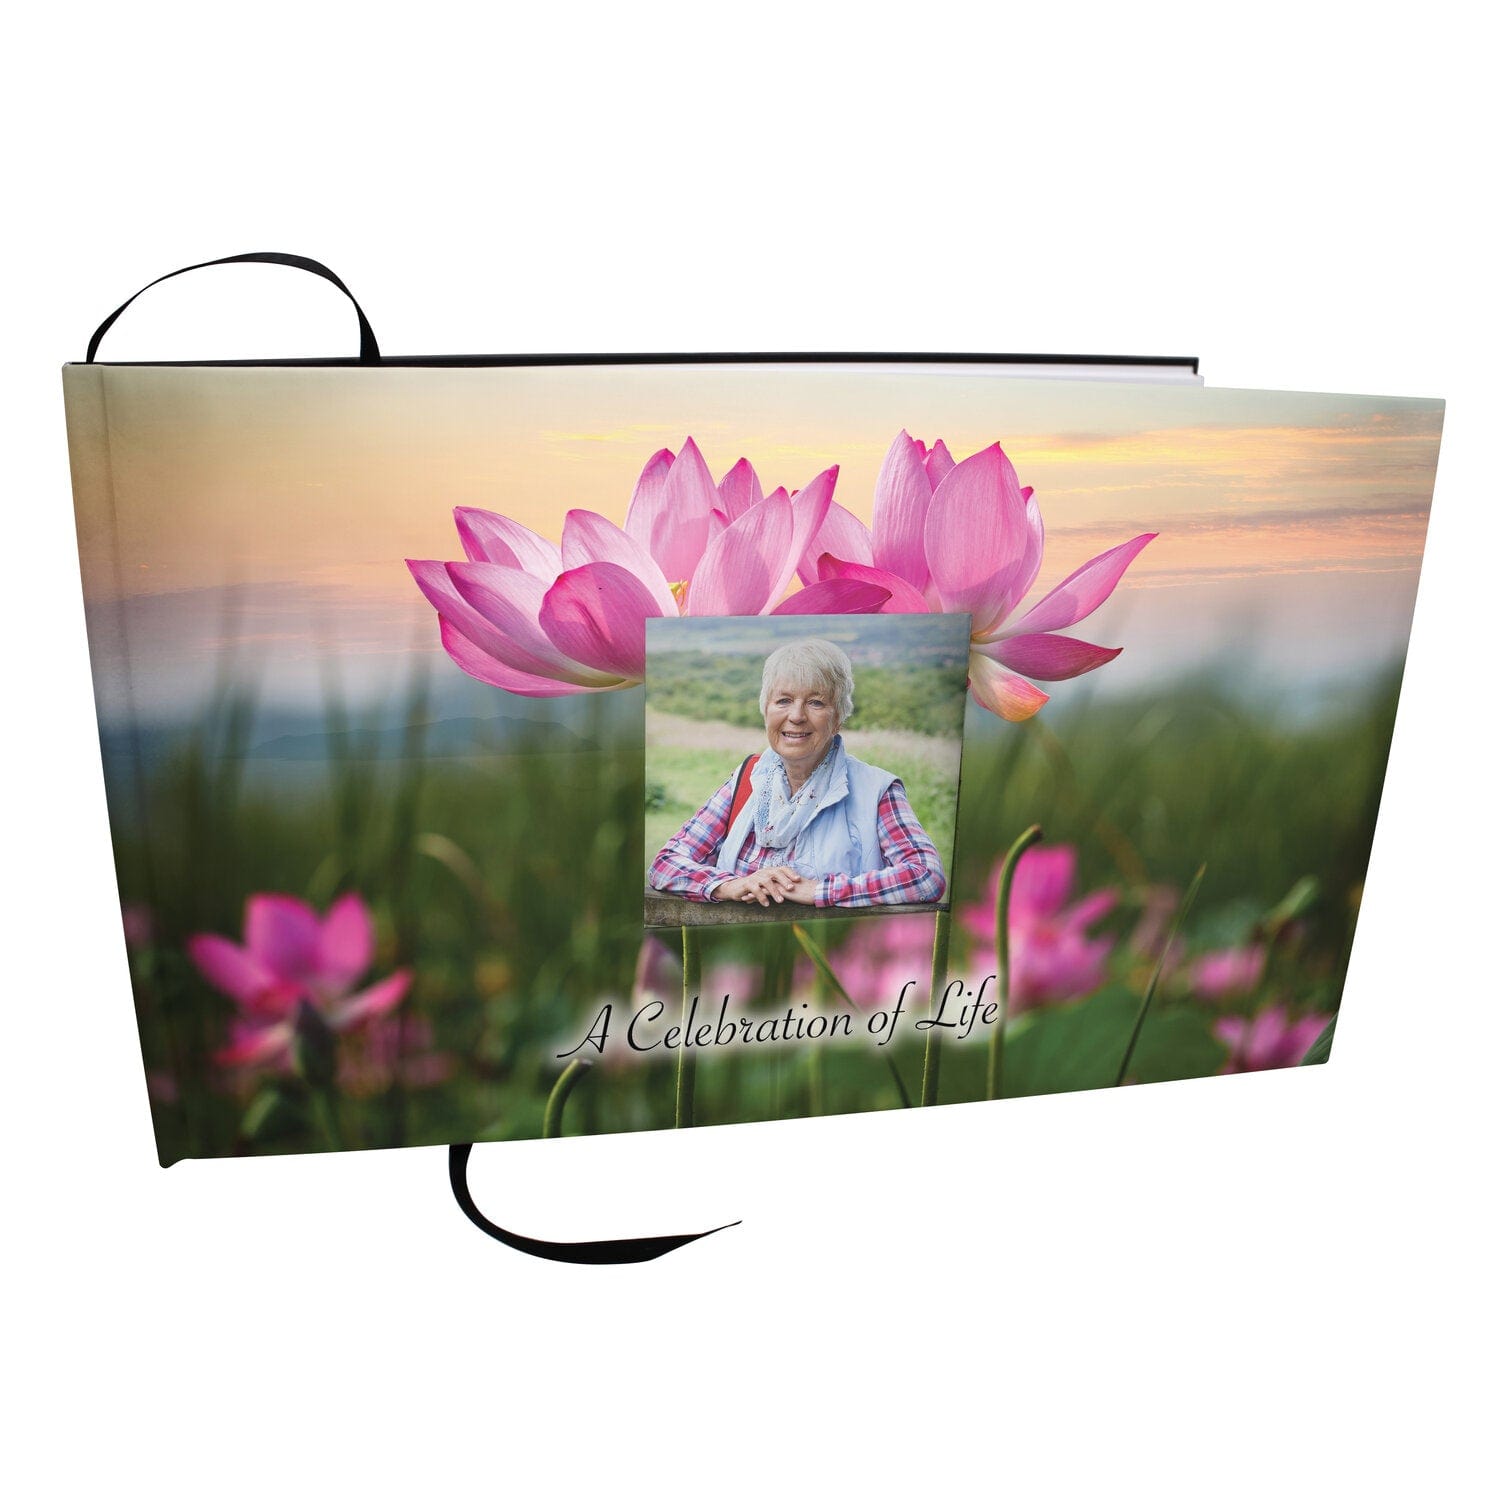 Commemorative Cremation Urns Lotus Tranquility Matching Themed 'Celebration of Life' Guest Book for Funeral or Memorial Service